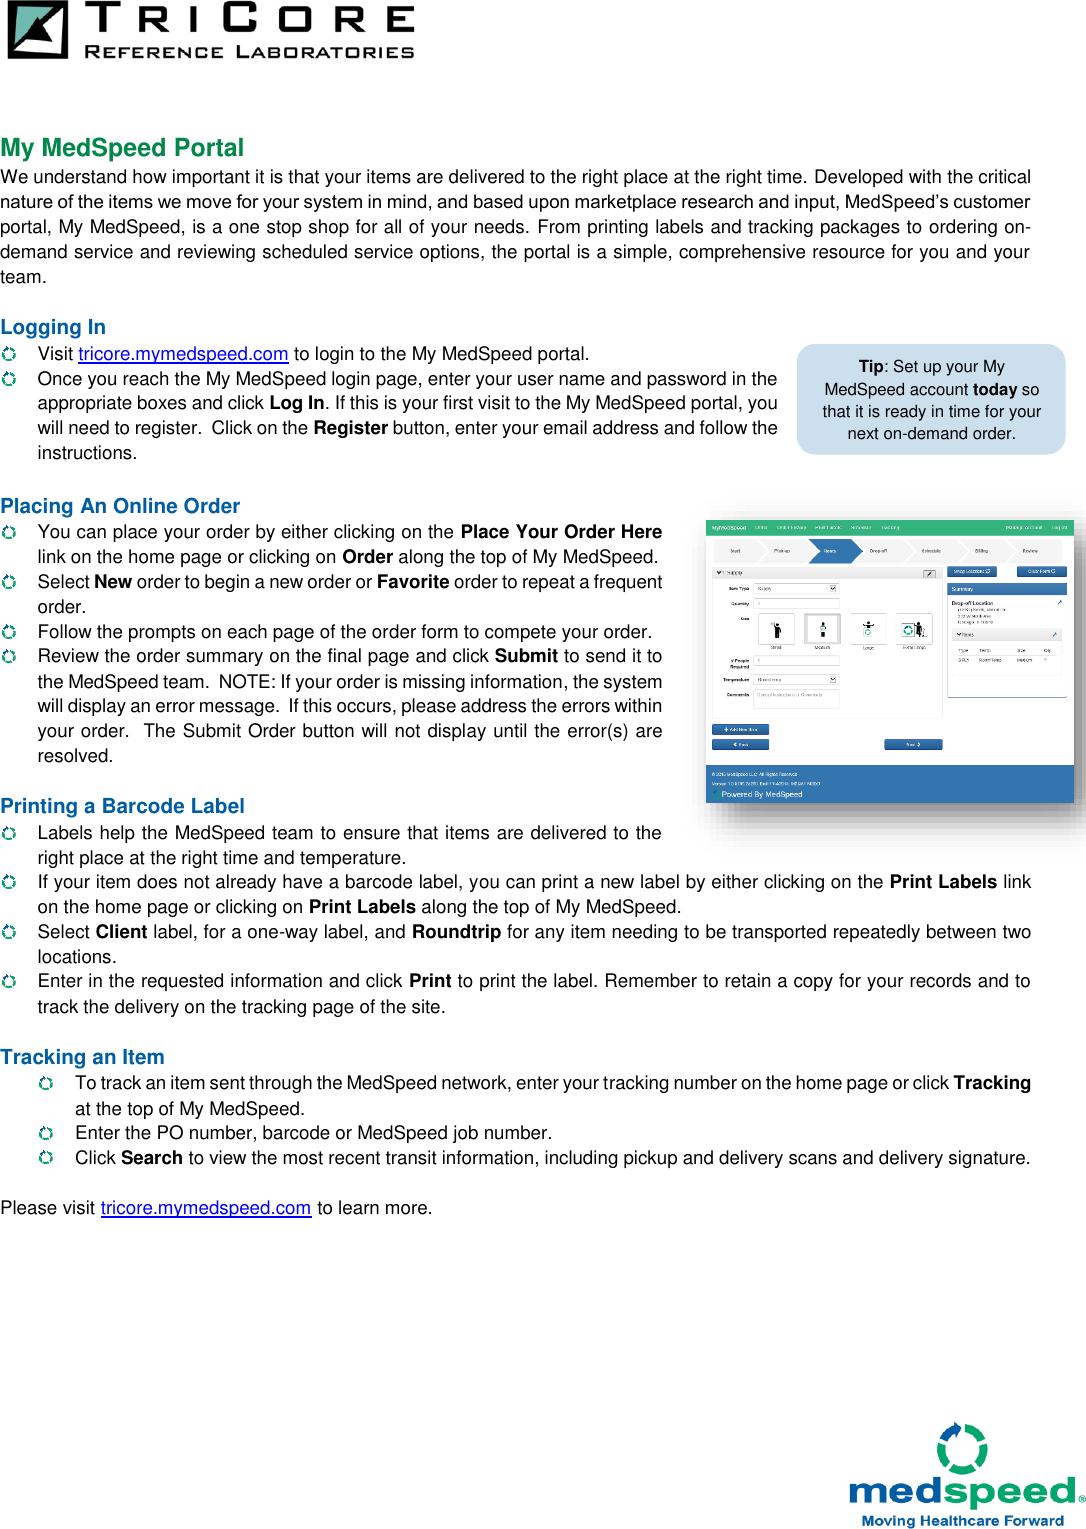 Page 2 of 2 - Tricore User Guide